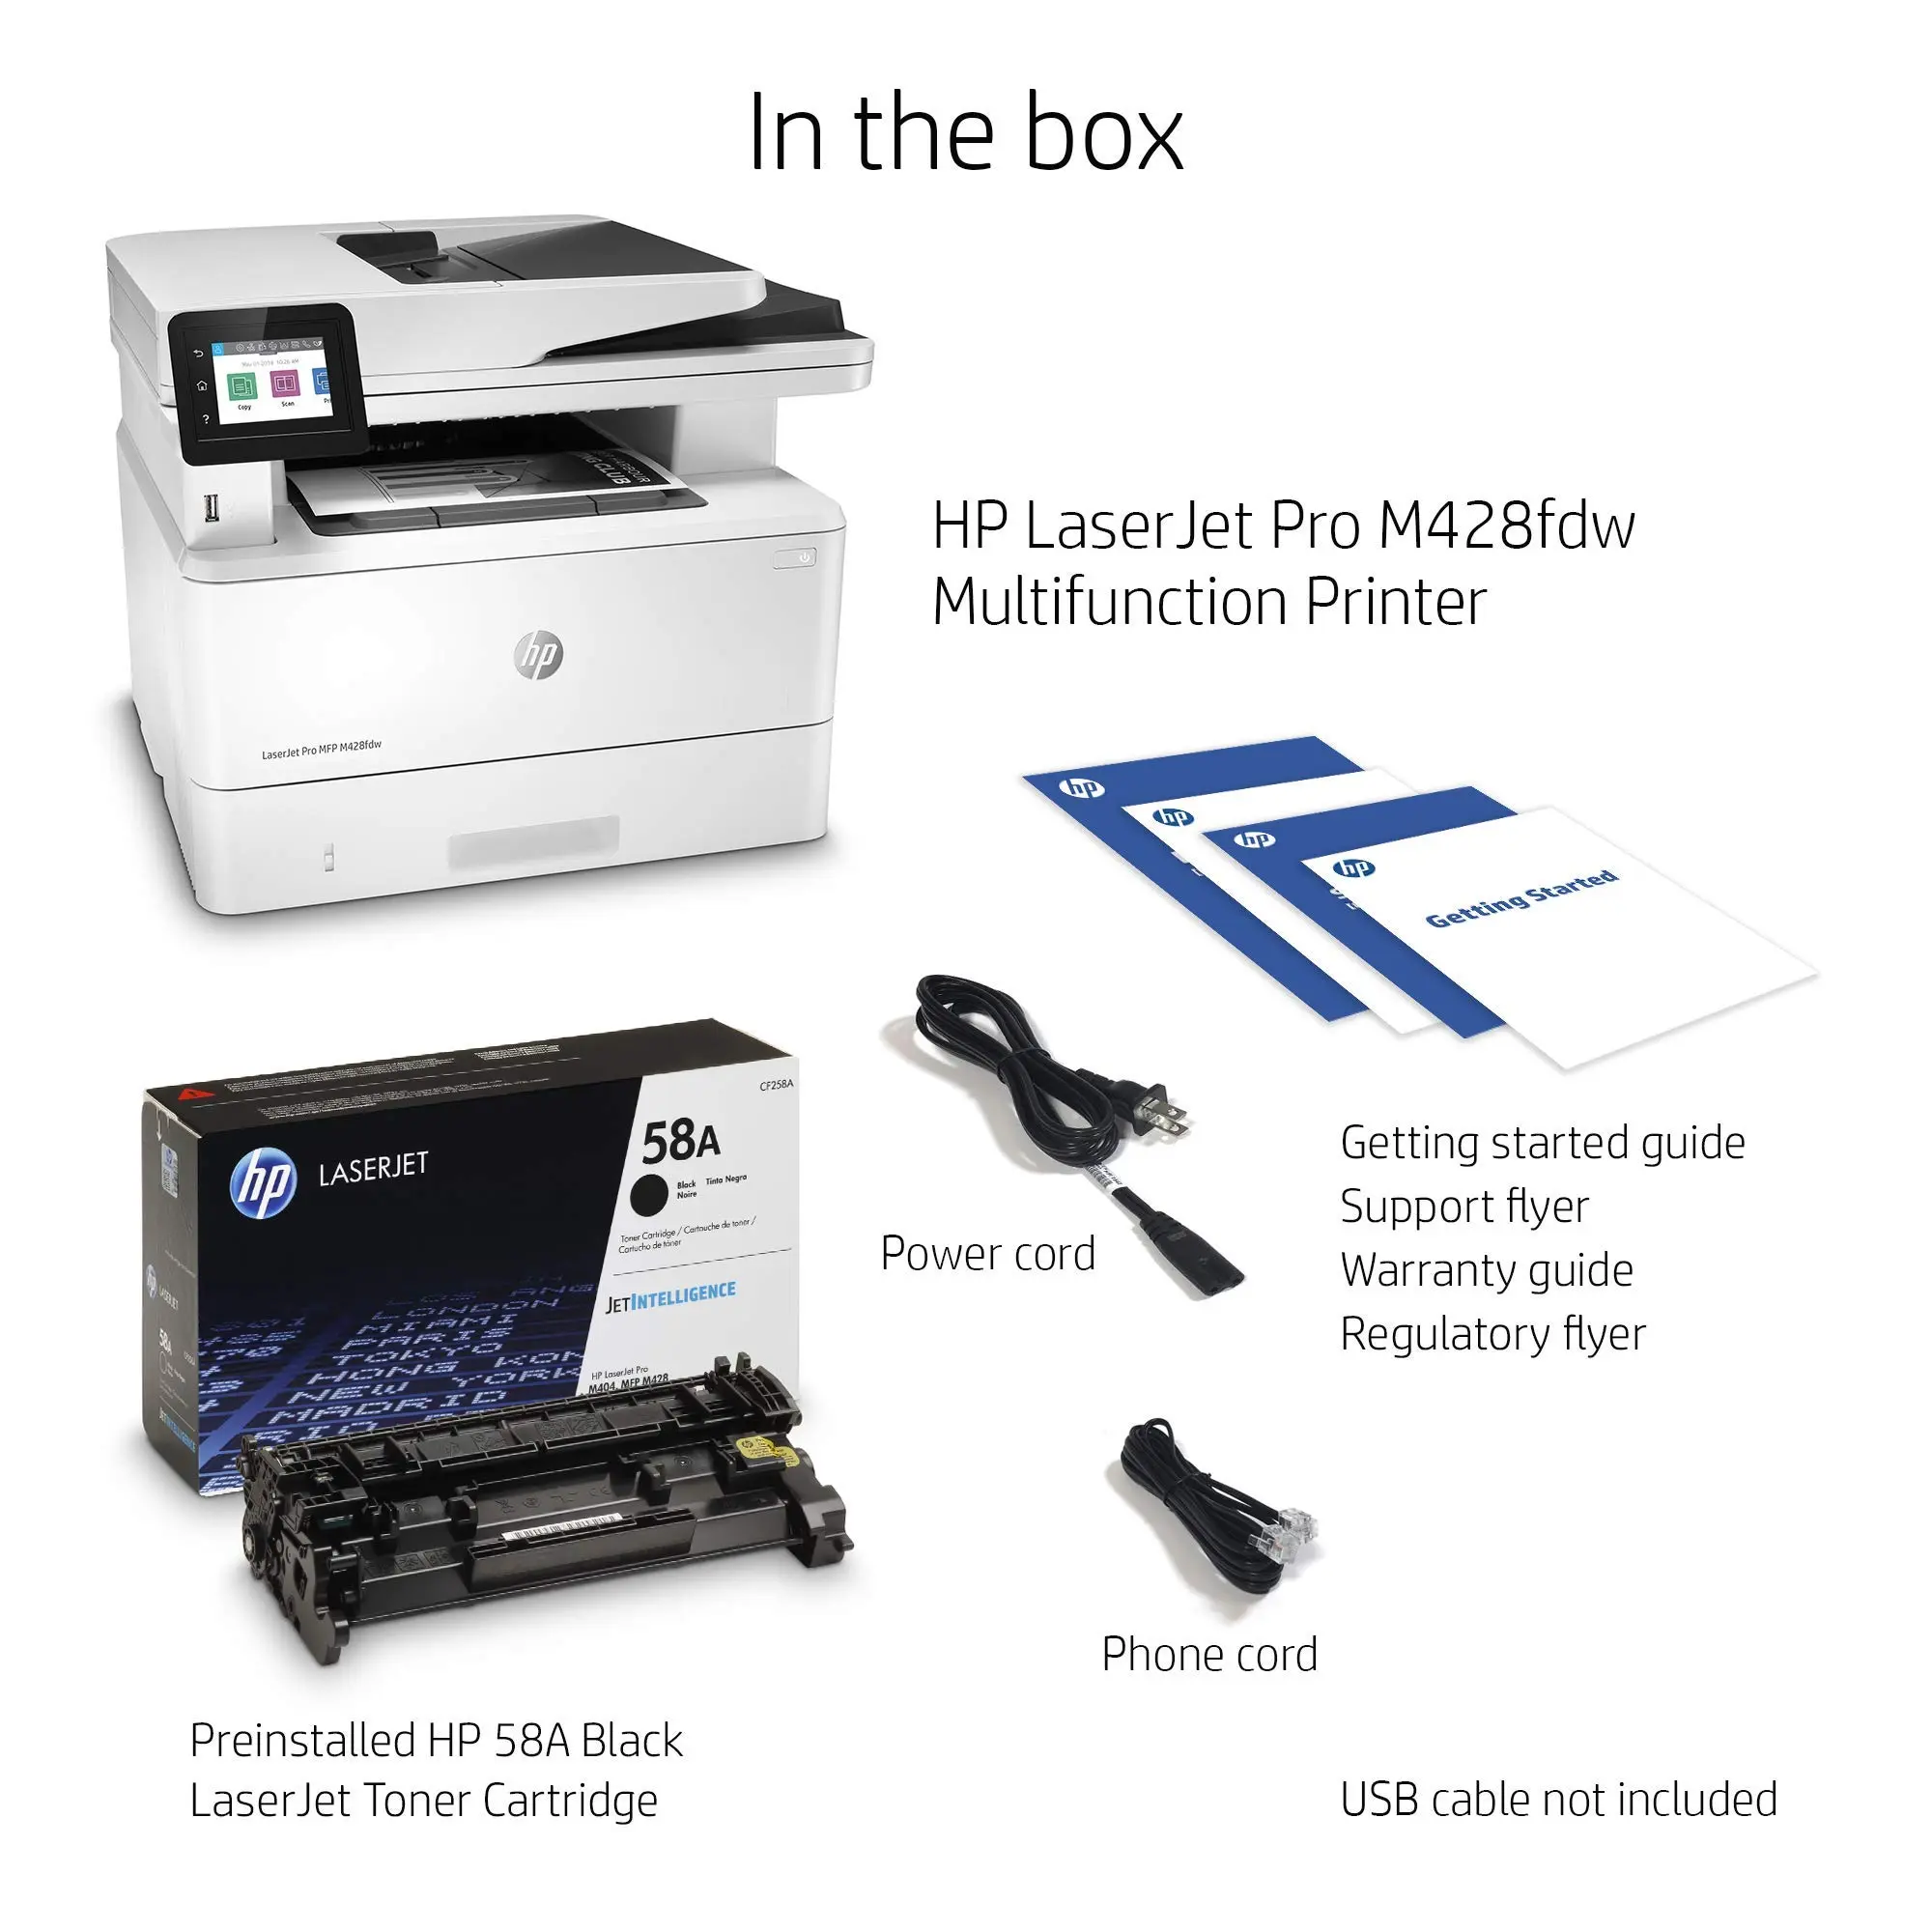 hewlett packard m428fdw - What is the price of MFP M428fdw